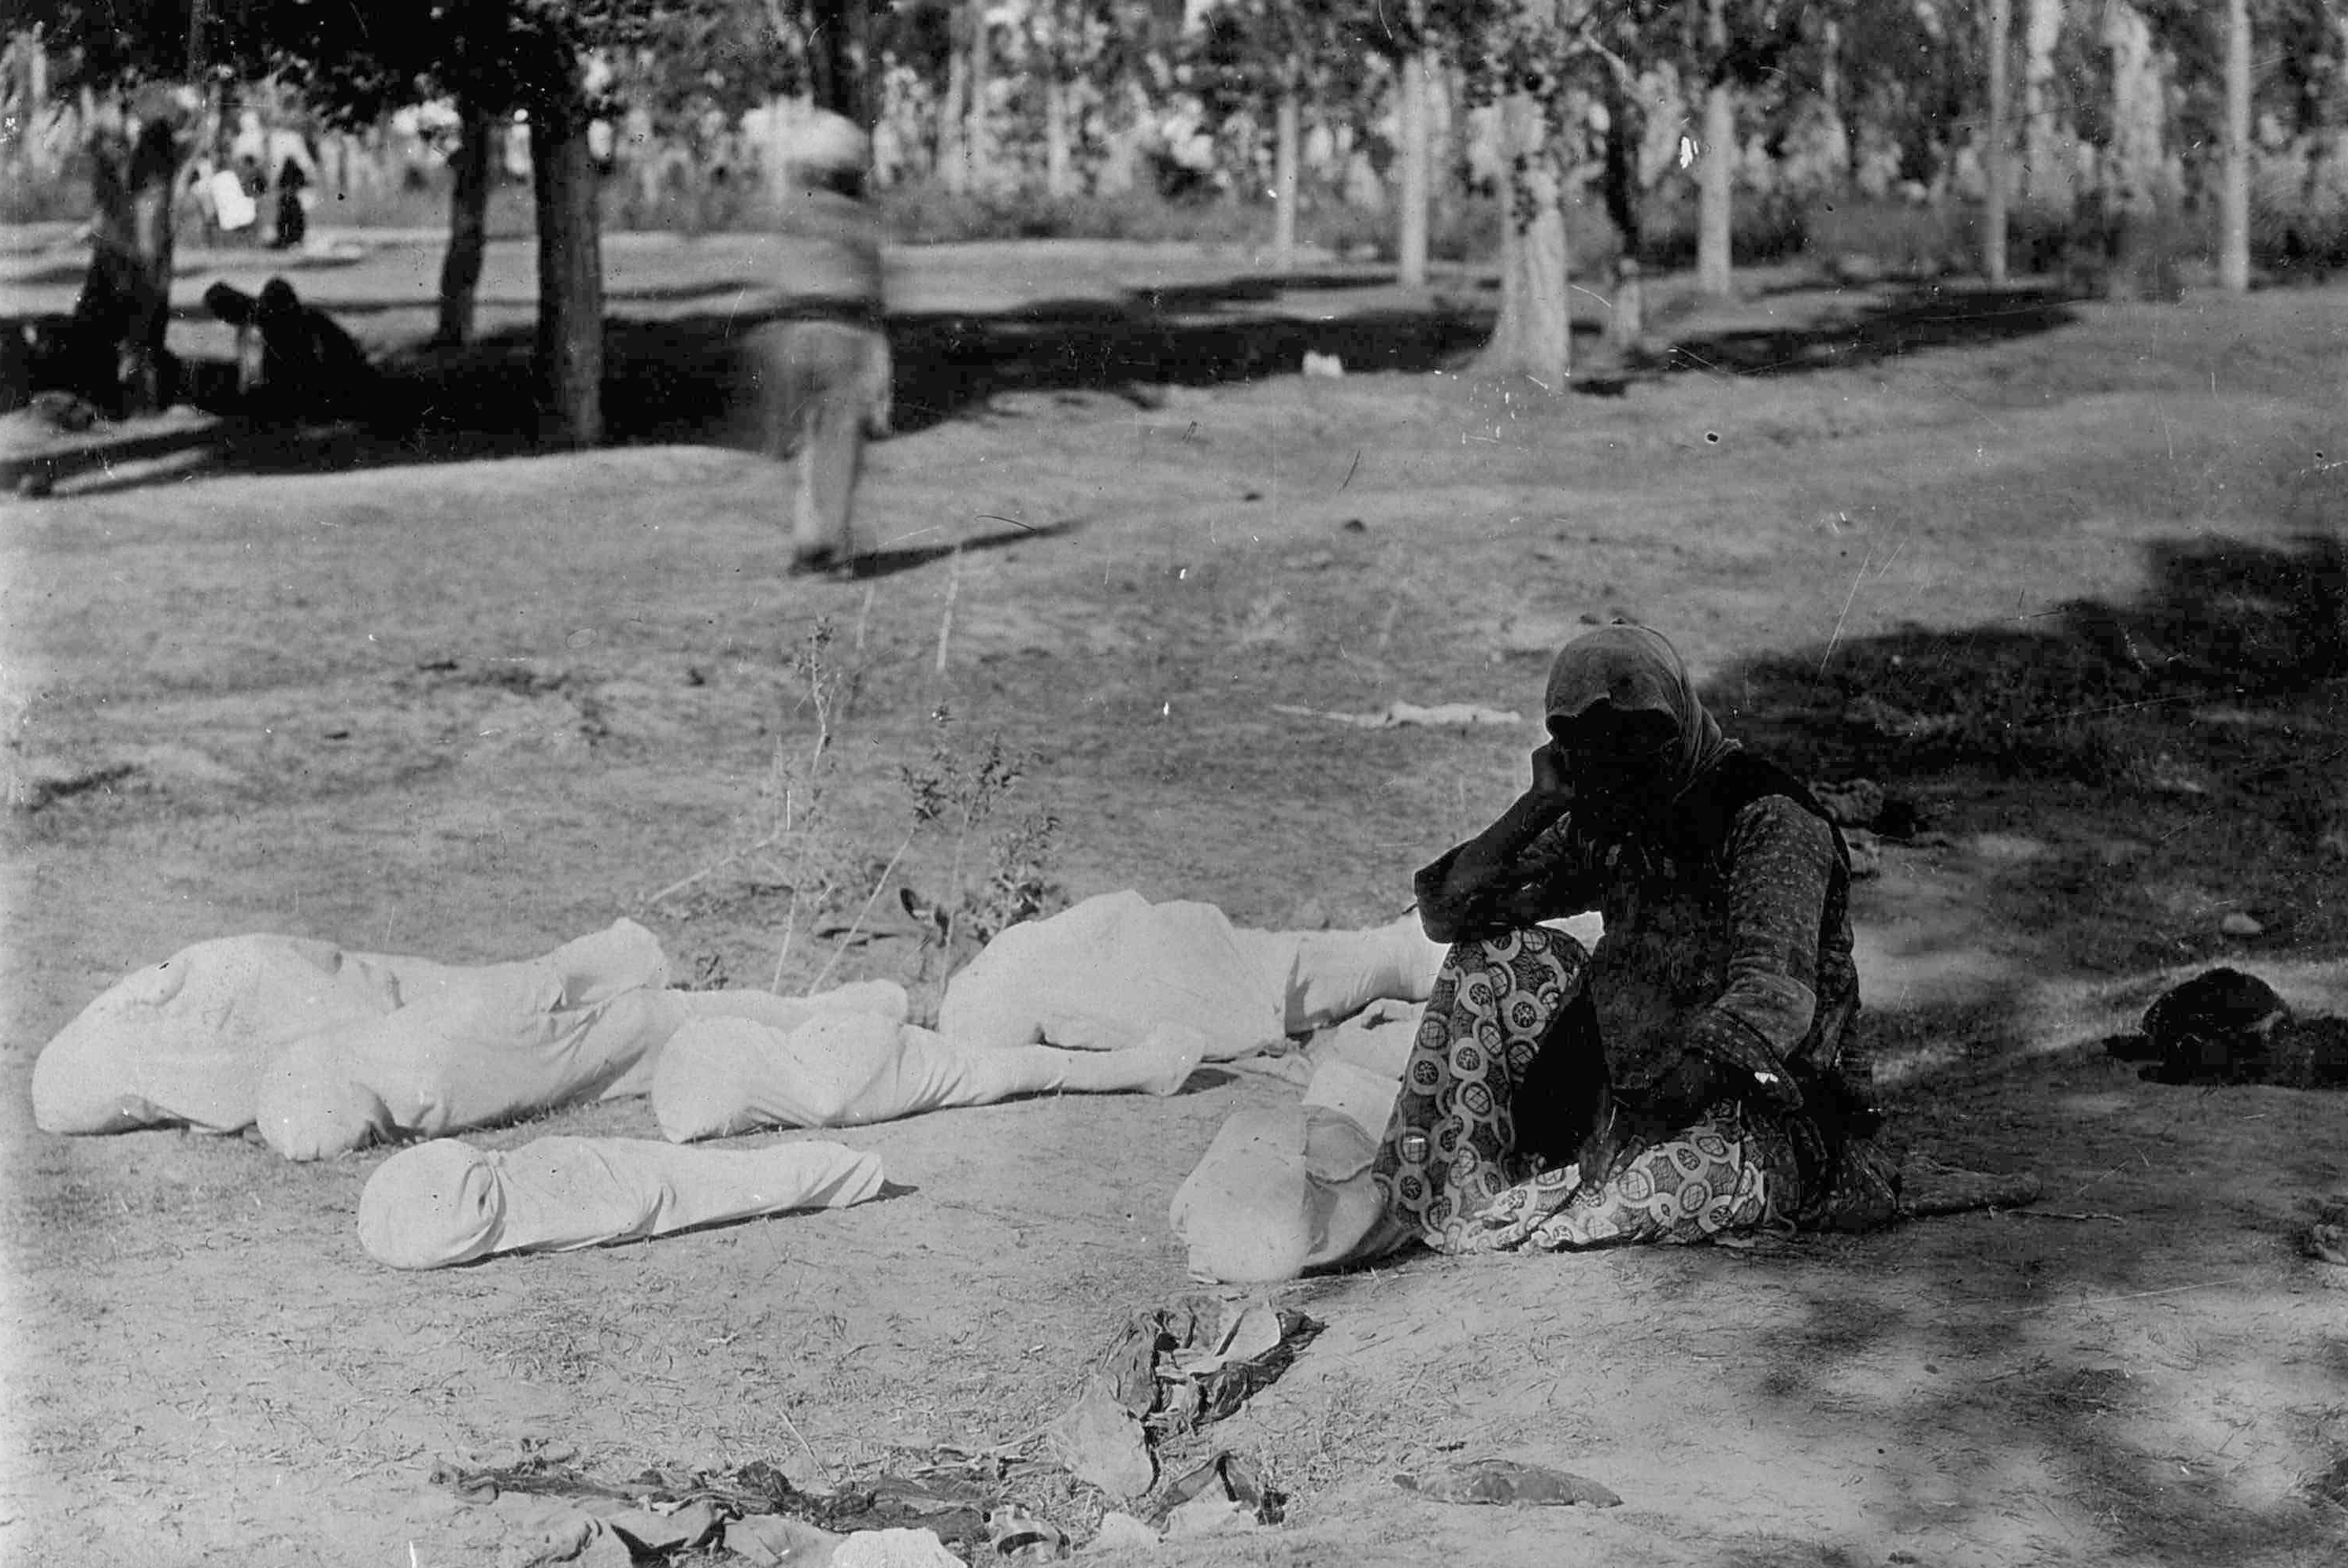 An Armenian mother sits besides the bodies of her 6 children in 1915. They had been separated from their mom and starved to death during the Armenian Genocide. The fate of the mother is unknown. The father may have already been killed. The Ottoman Turks are believed to have killed 1.5 million Armenians in an ethnic cleansing of the area. They executed many, but preferred to starve the Armenians, often separating families and sometimes using the adults into forced labor while the old, sick, and children starved. Eventually they would kill everyone who were no longer useful. Many fled to Syria and would die on the harsh roads. Turkey to this day does not acknowledge the genocide.